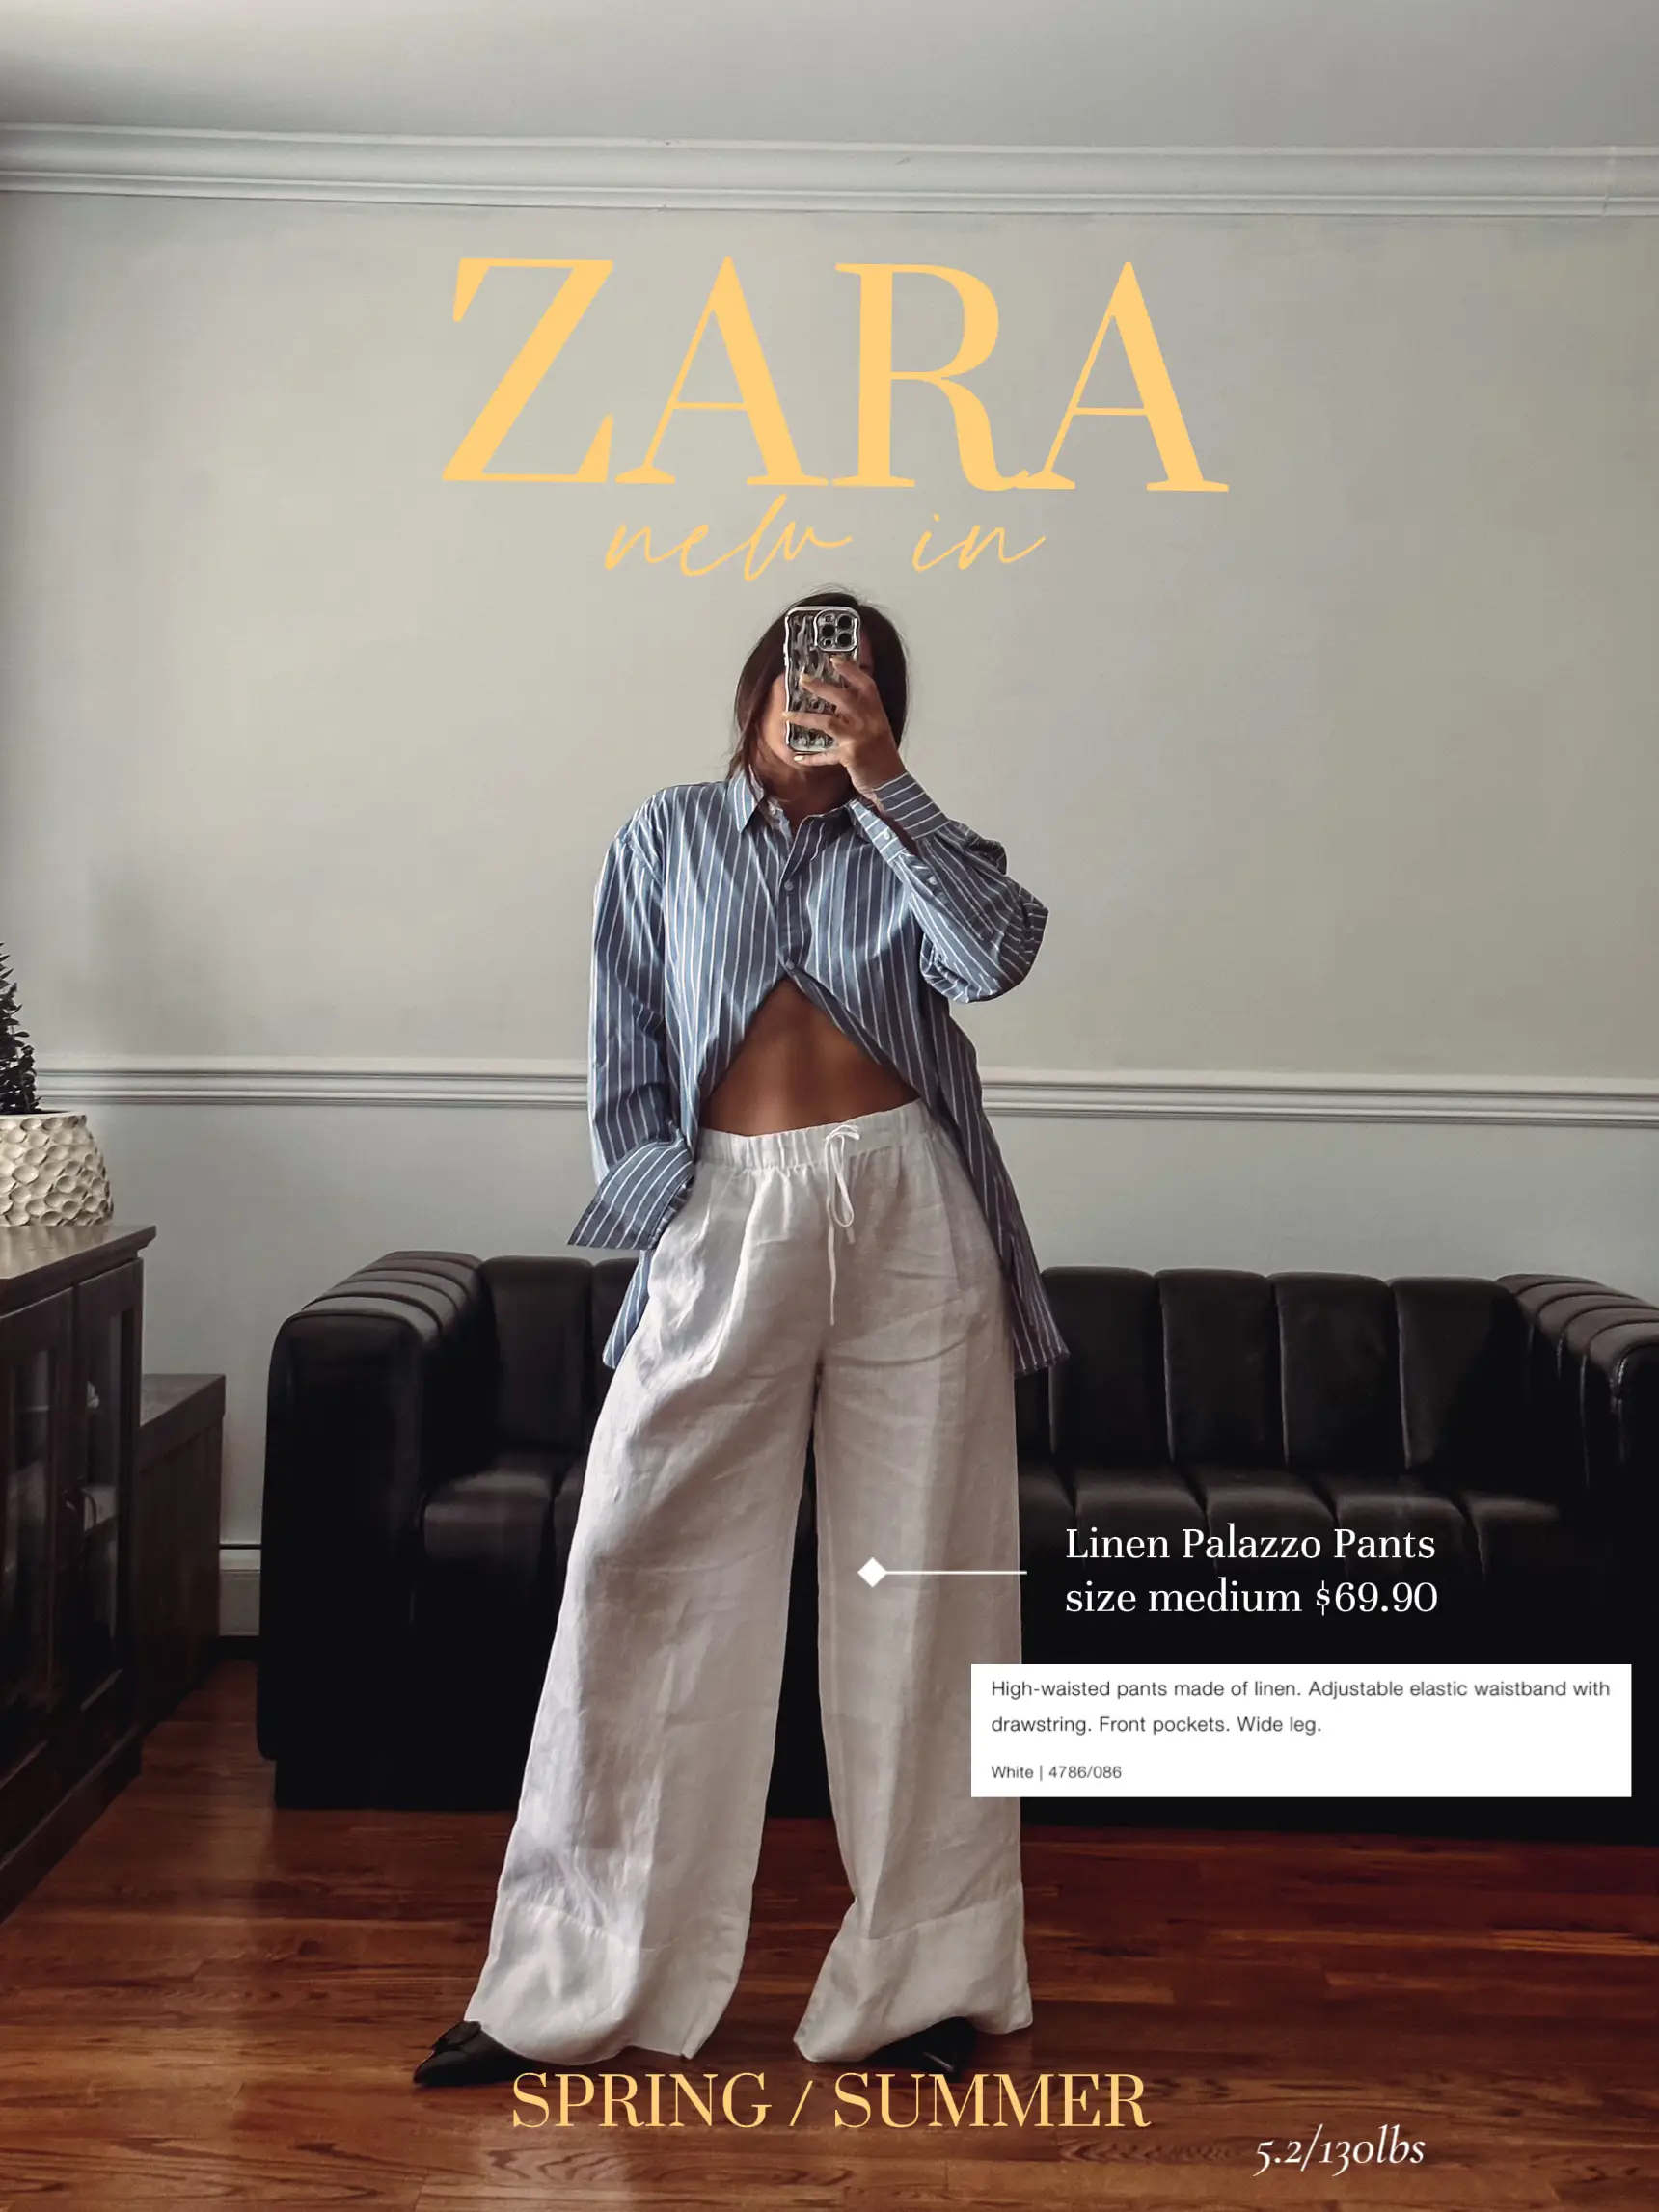 Zara Wide-Leg Floral Pants - Curves and Confidence